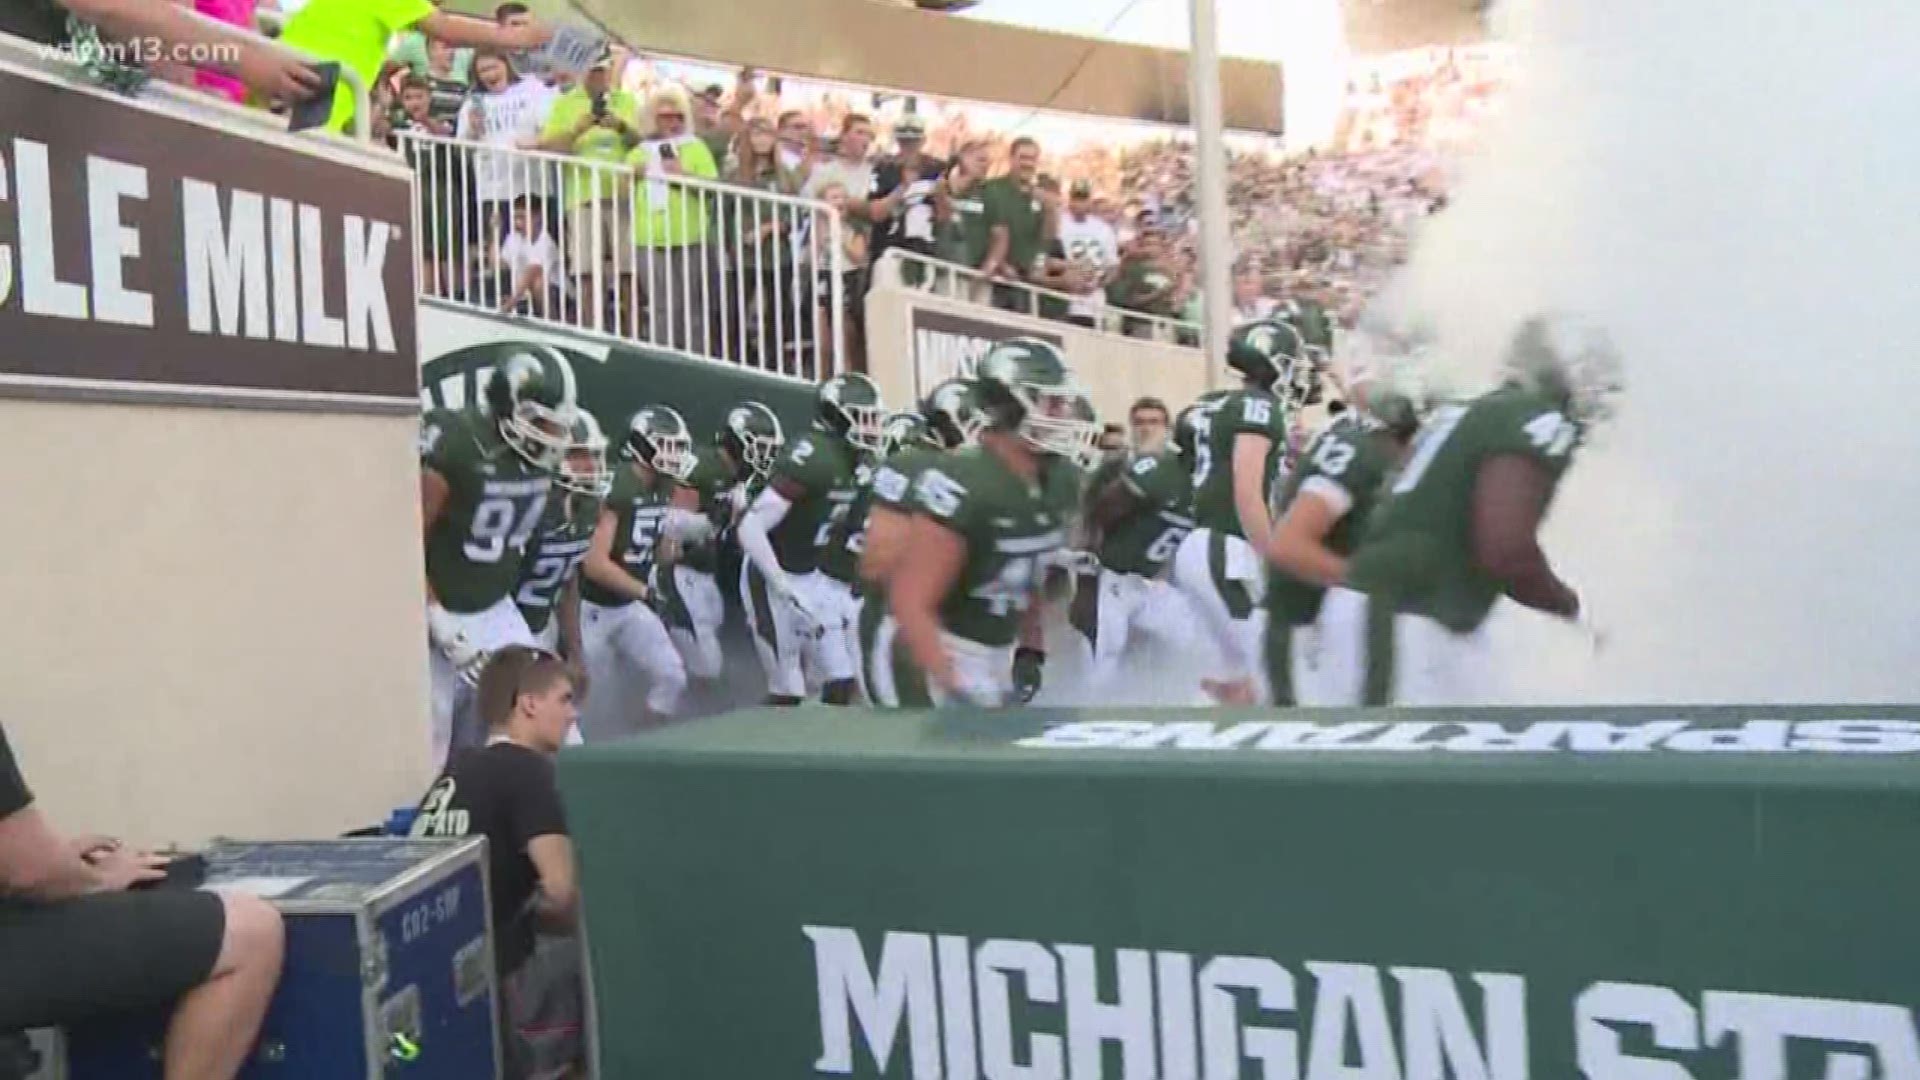 Going into Saturday, MSU doesn't care about past success